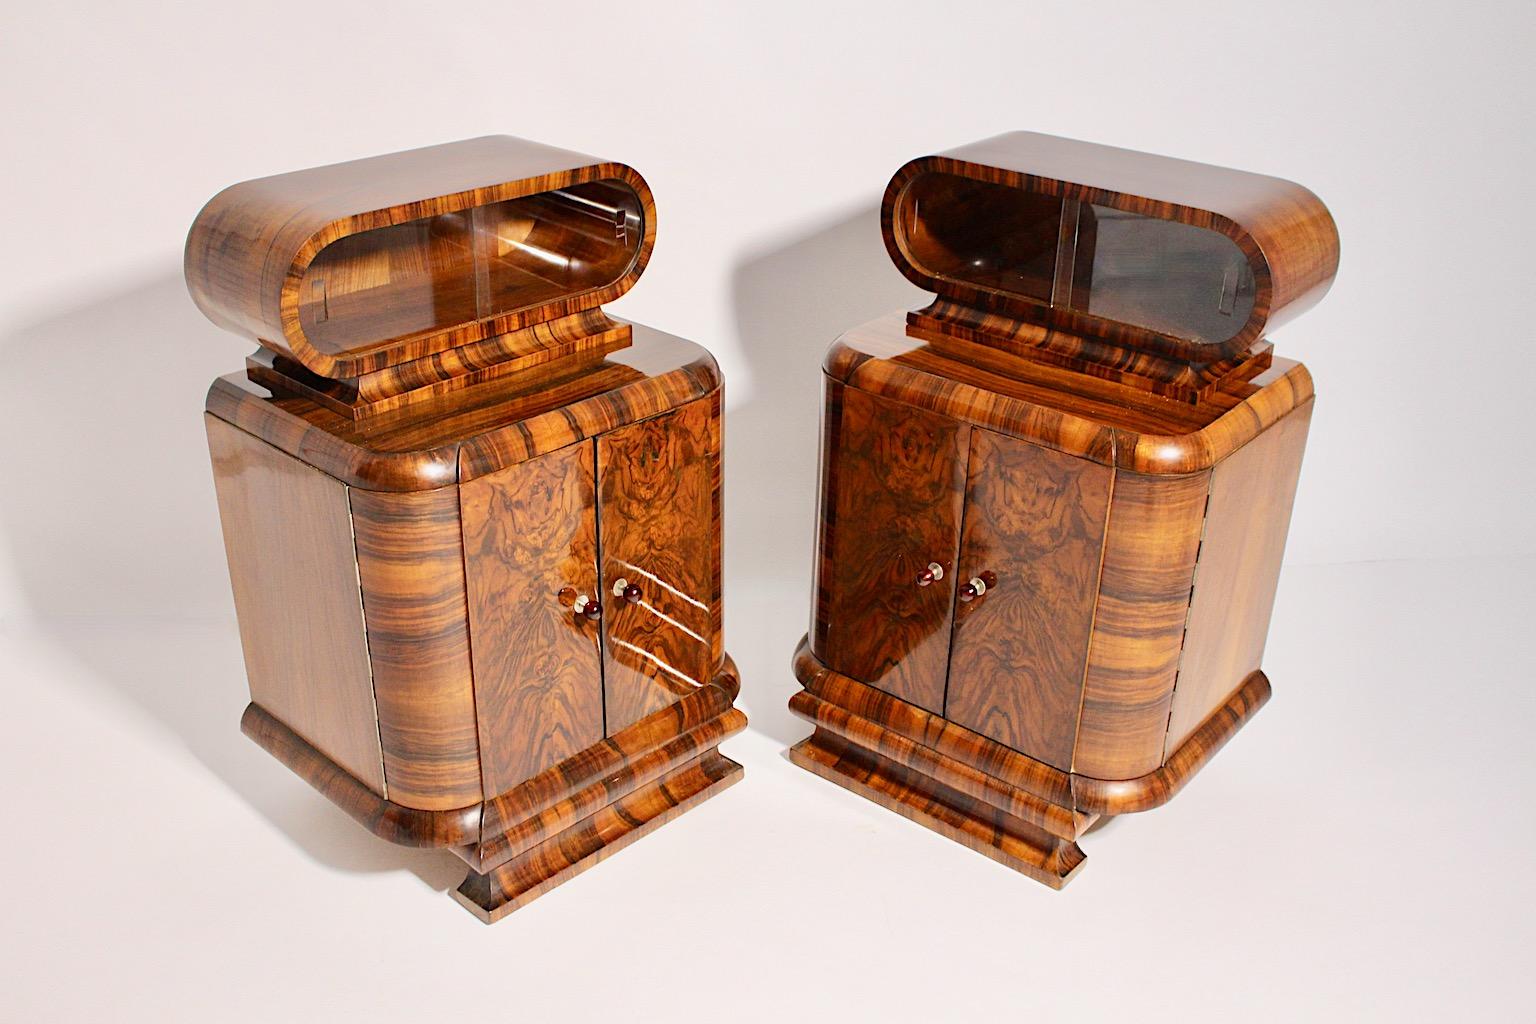 Art Deco vintage pair of nightstands or small chests or commodes from walnut Vienna 1930s.
While the wonderful nightstands show a lively play of walnut veneer and solid walnut in a warm brown color, backside from plywood, the doors feature a round